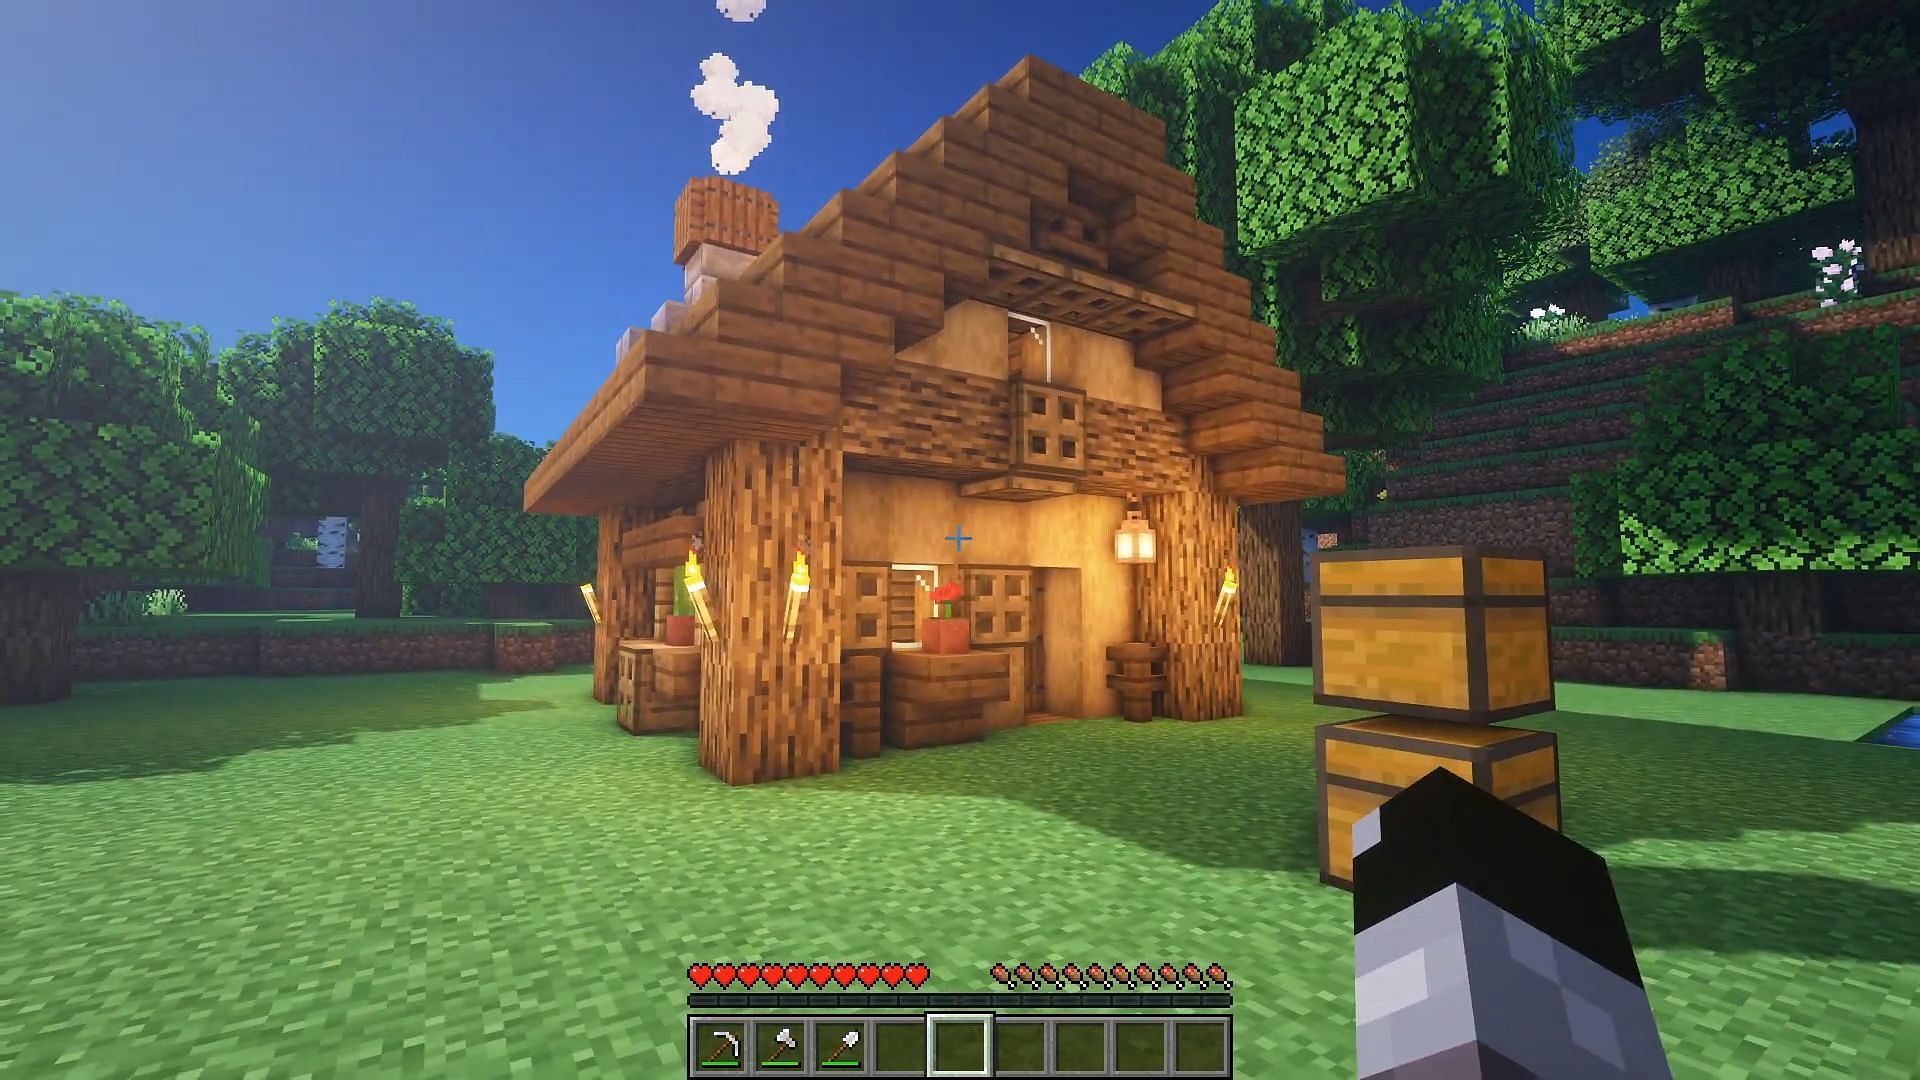 Building in the forest is fun to do in Minecraft (Image via YouTube/Folli)